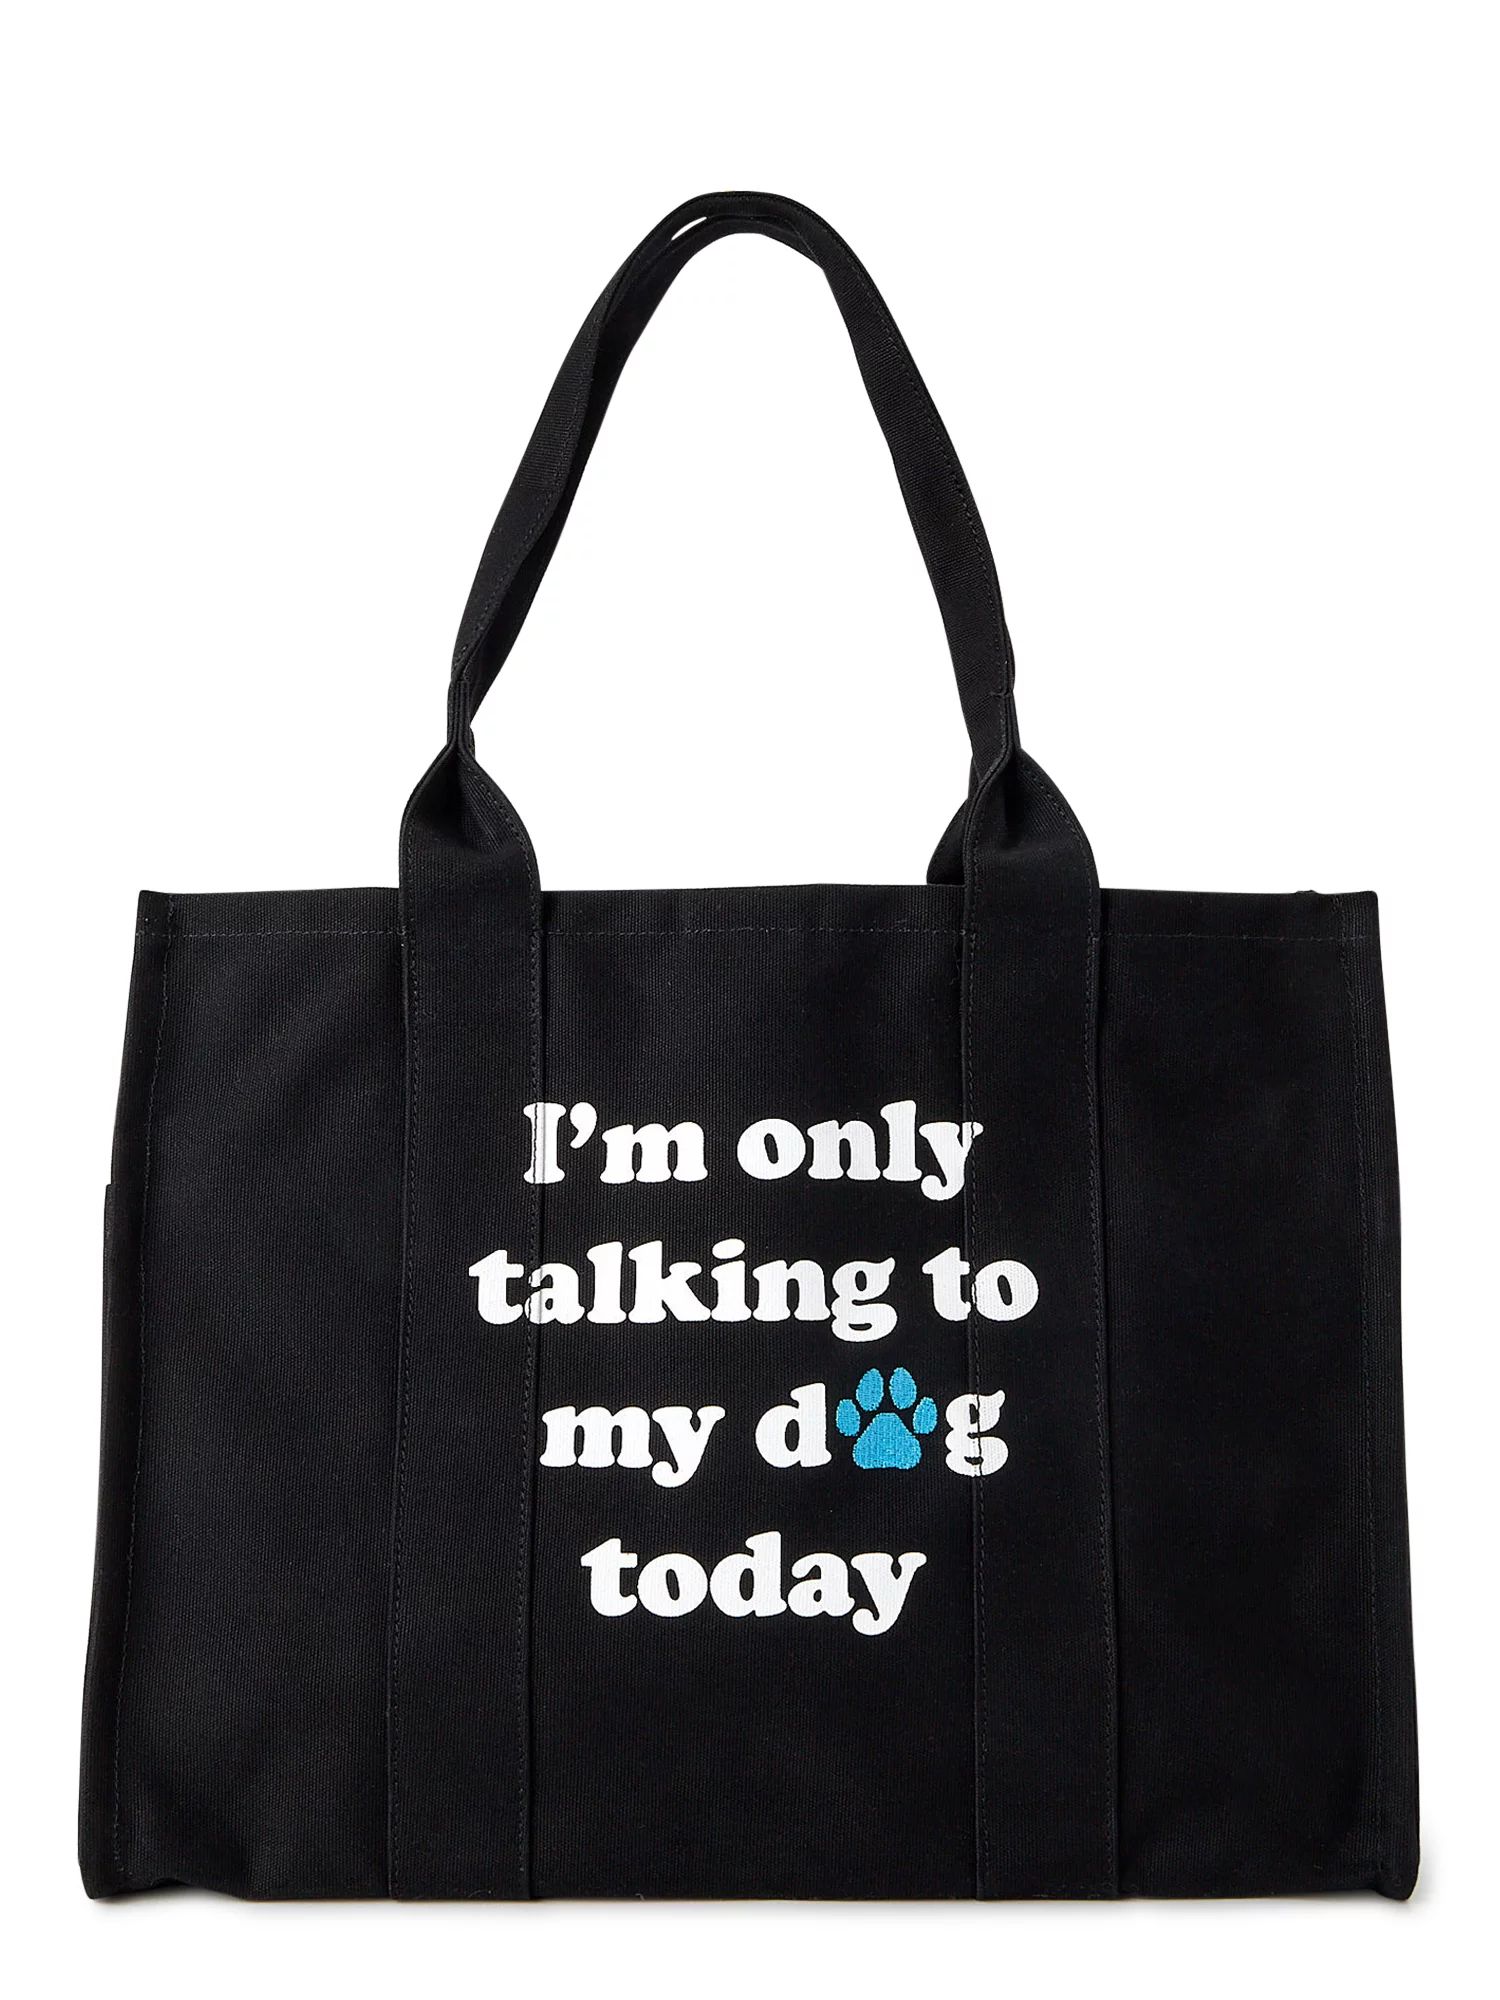 Time and Tru Women's Elevated Canvas Tote Bag Black I'm Only Talk To My Dog Today | Walmart (US)